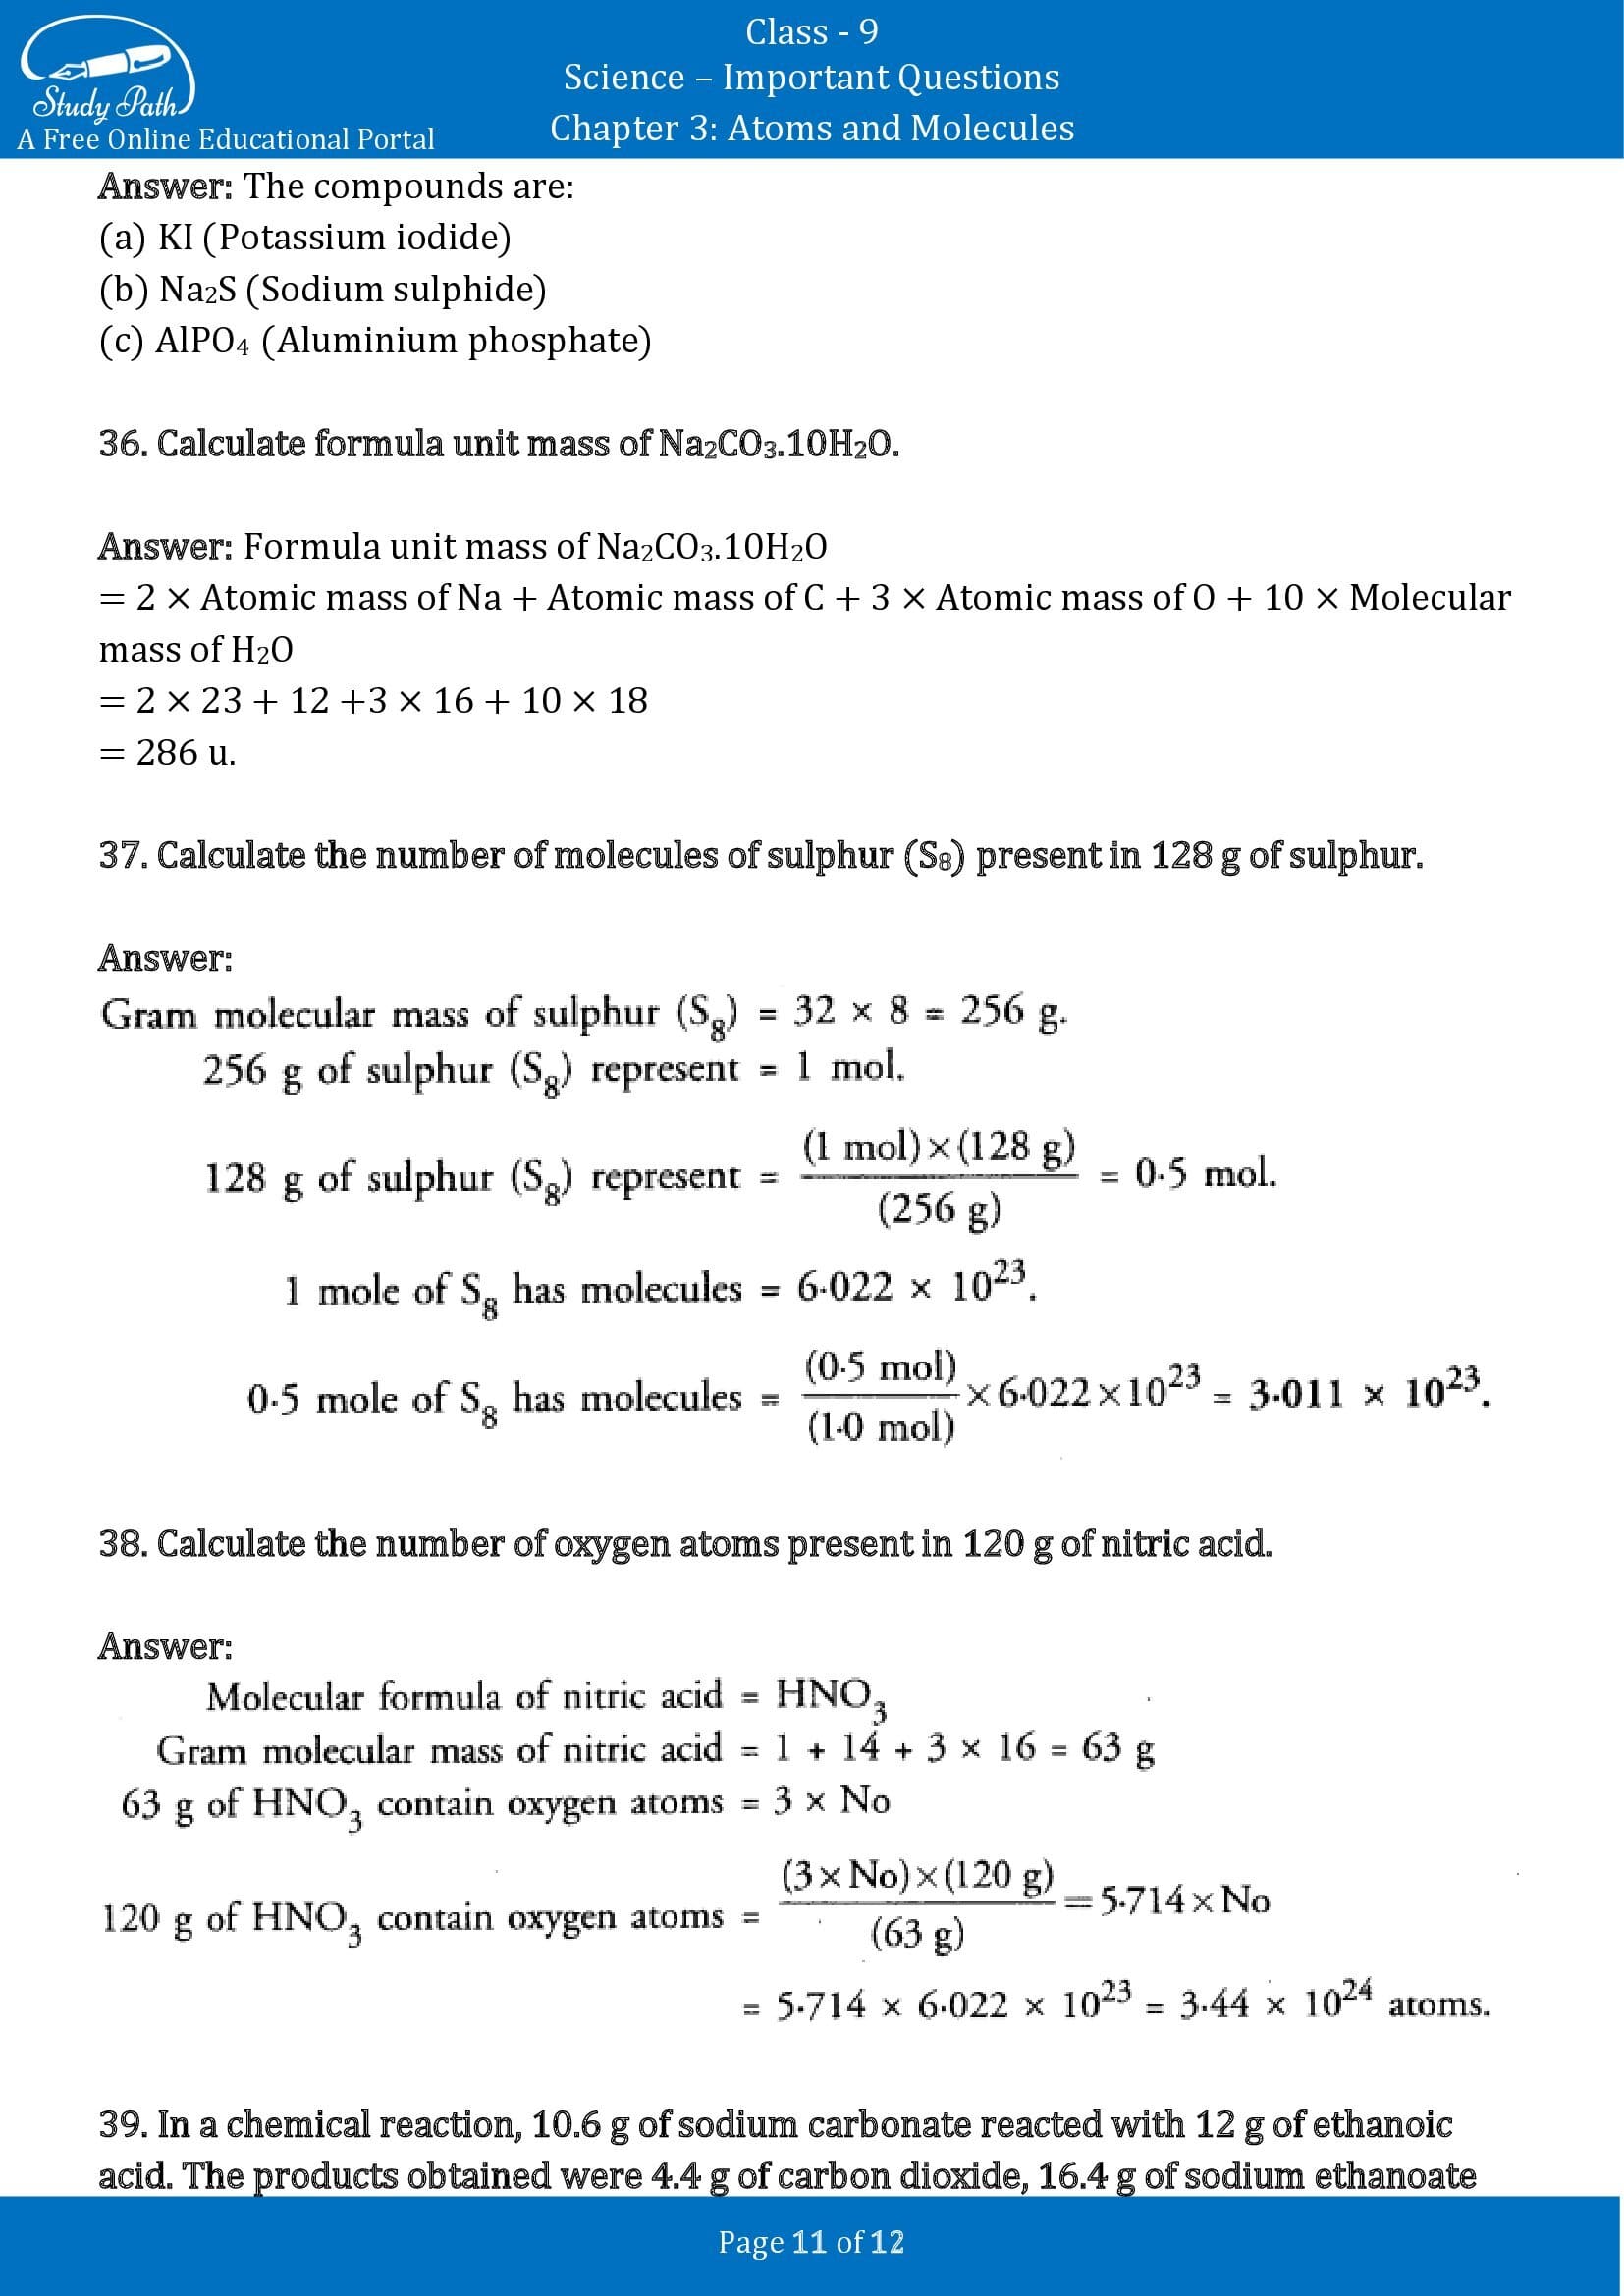 case study questions based on atoms and molecules class 9